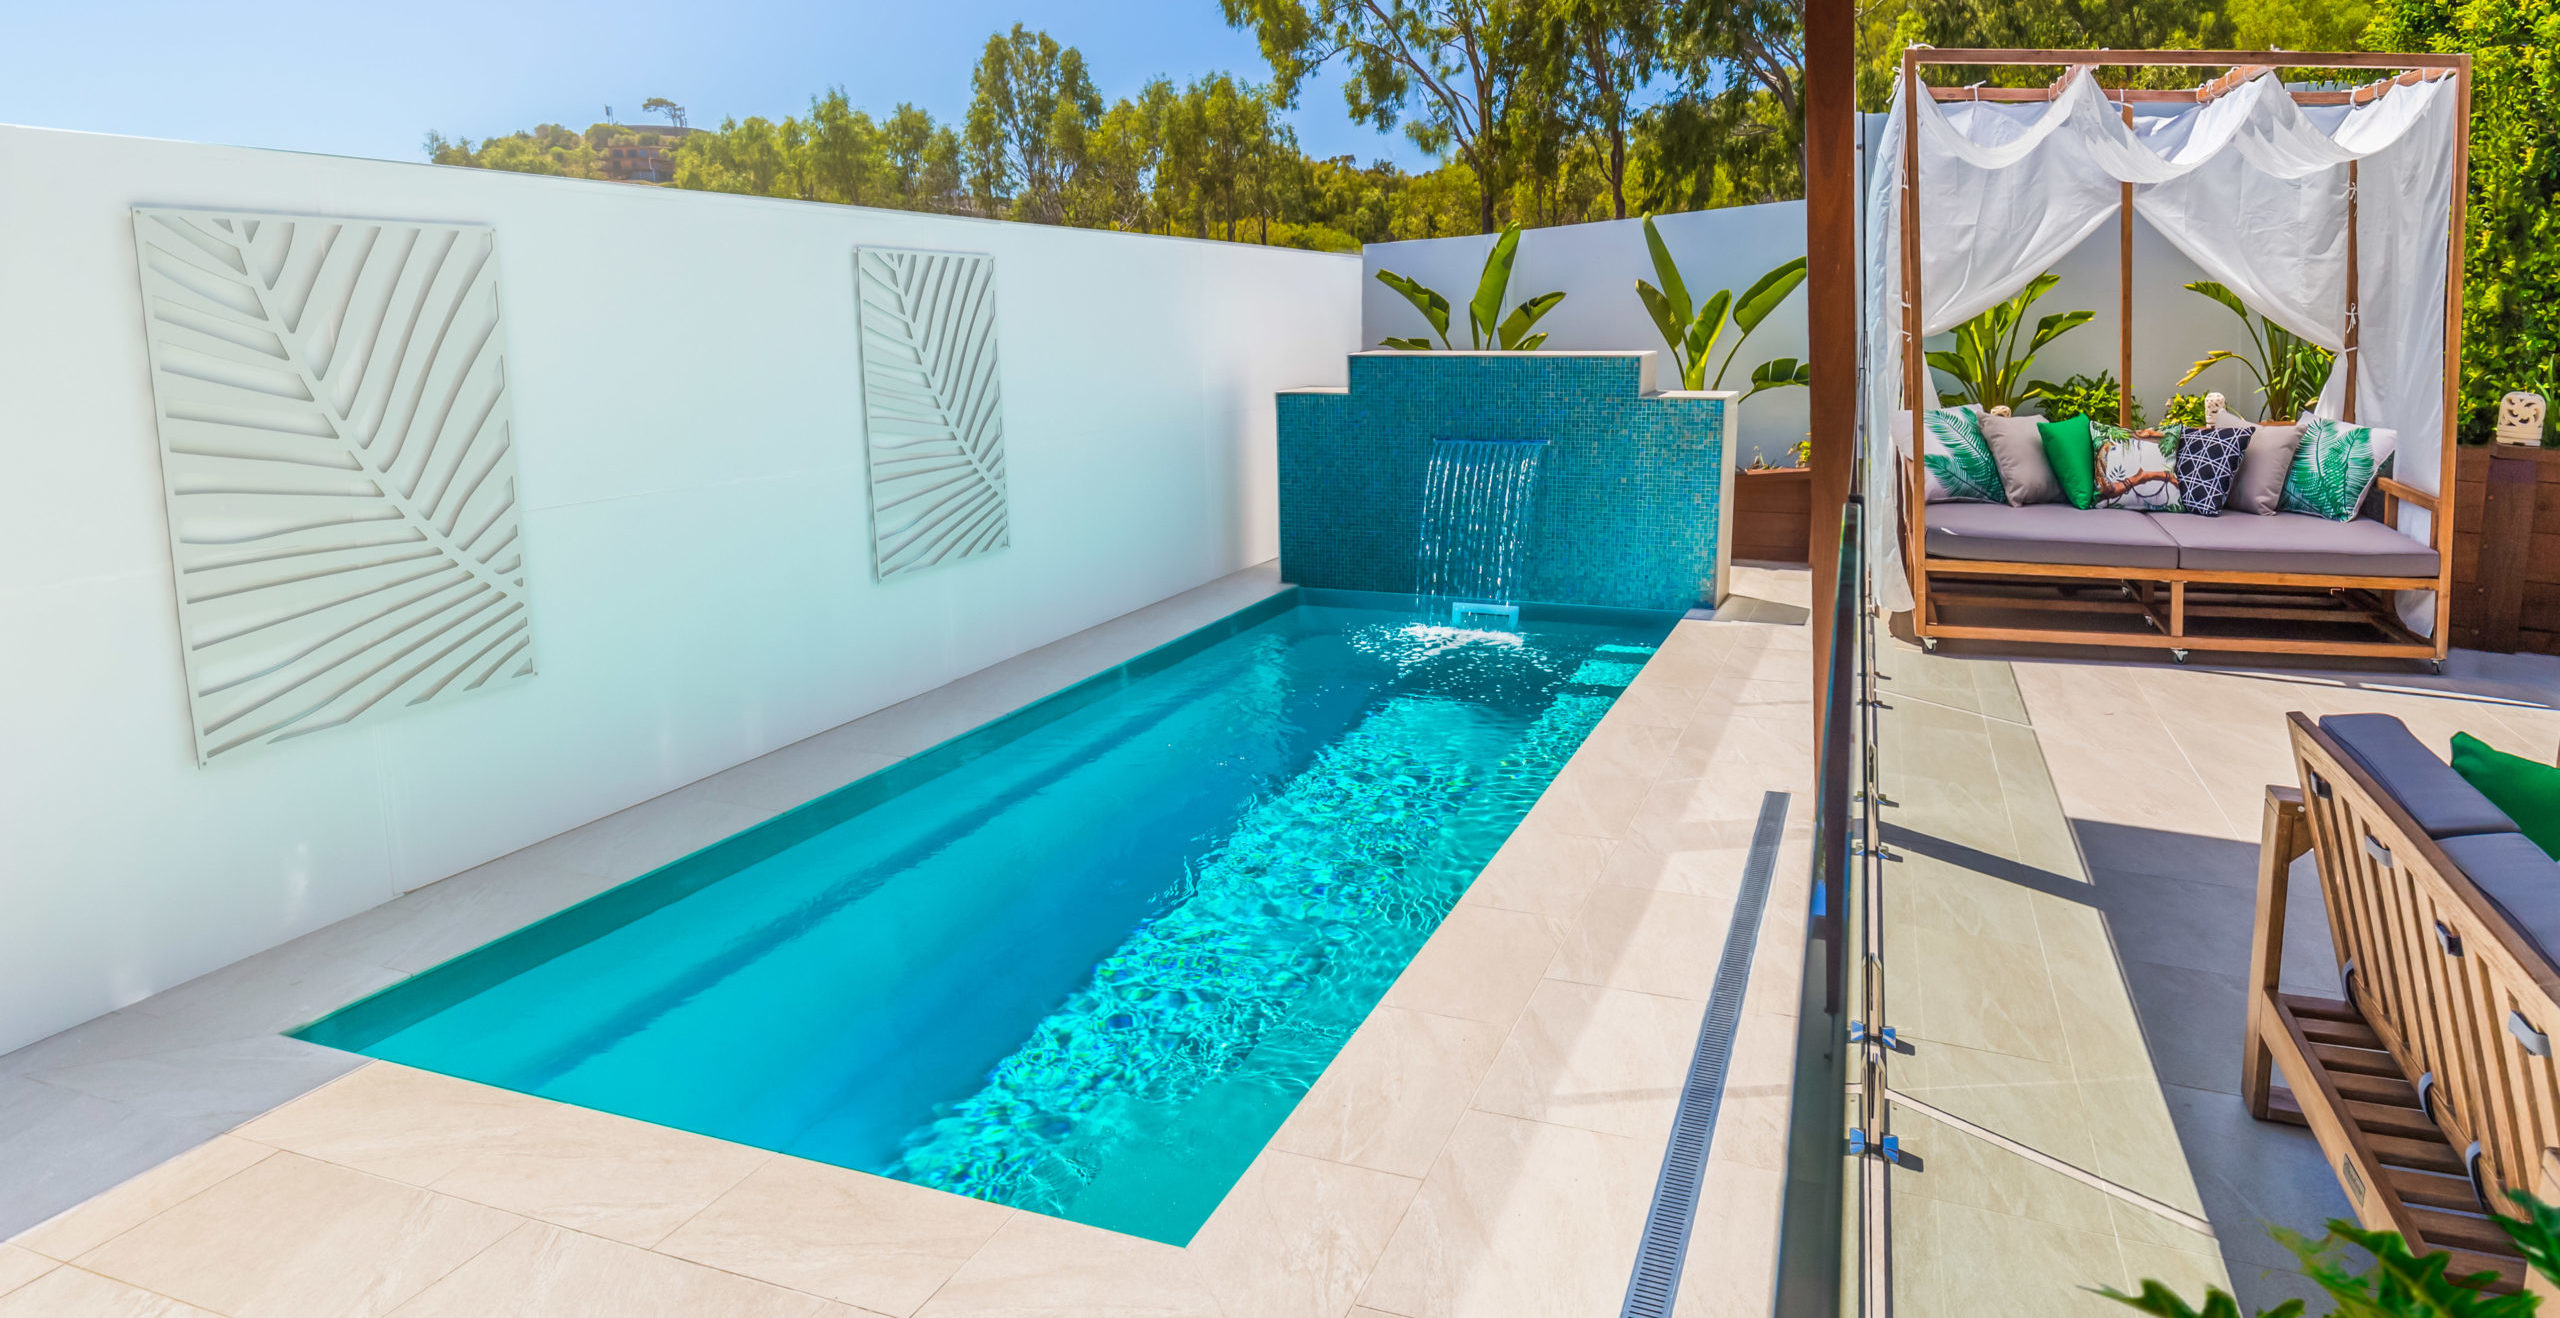 Master Professional Pools, Pool Builders in Gold Coast and South Brisbane